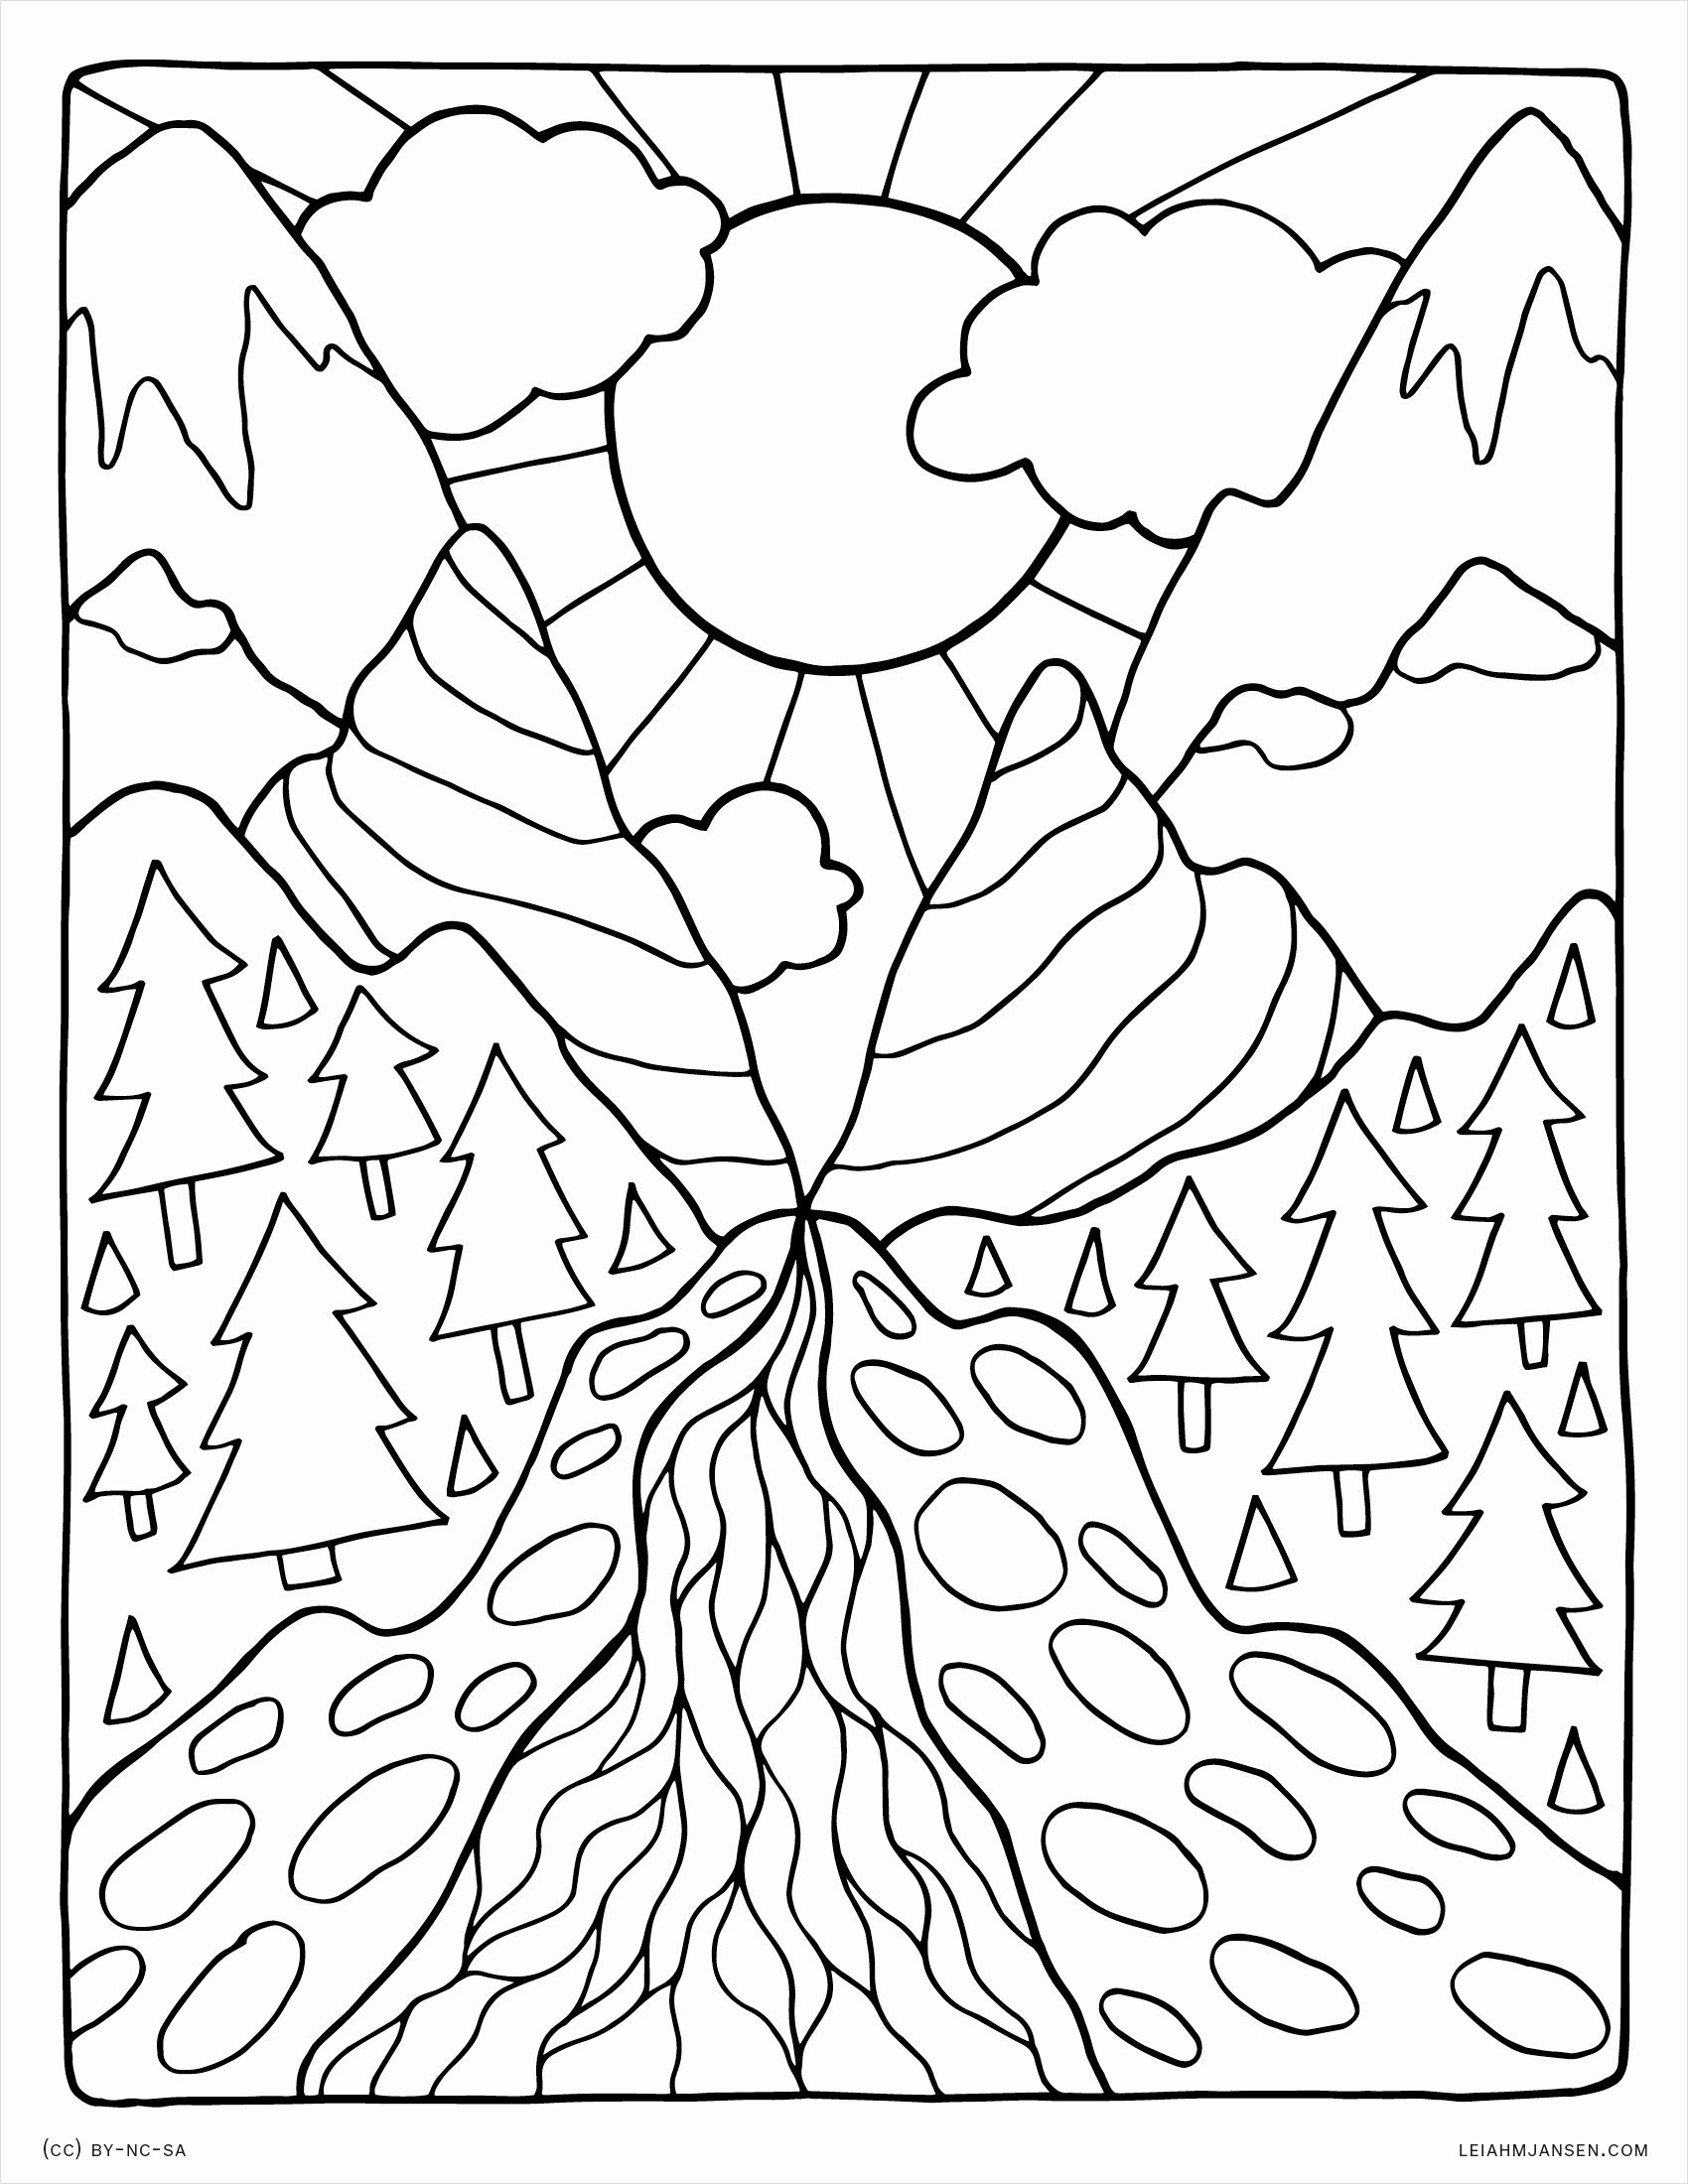 Coloring Pages For Kids Nature With Free Printable Nature Coloring - Free Printable Nature Coloring Pages For Adults